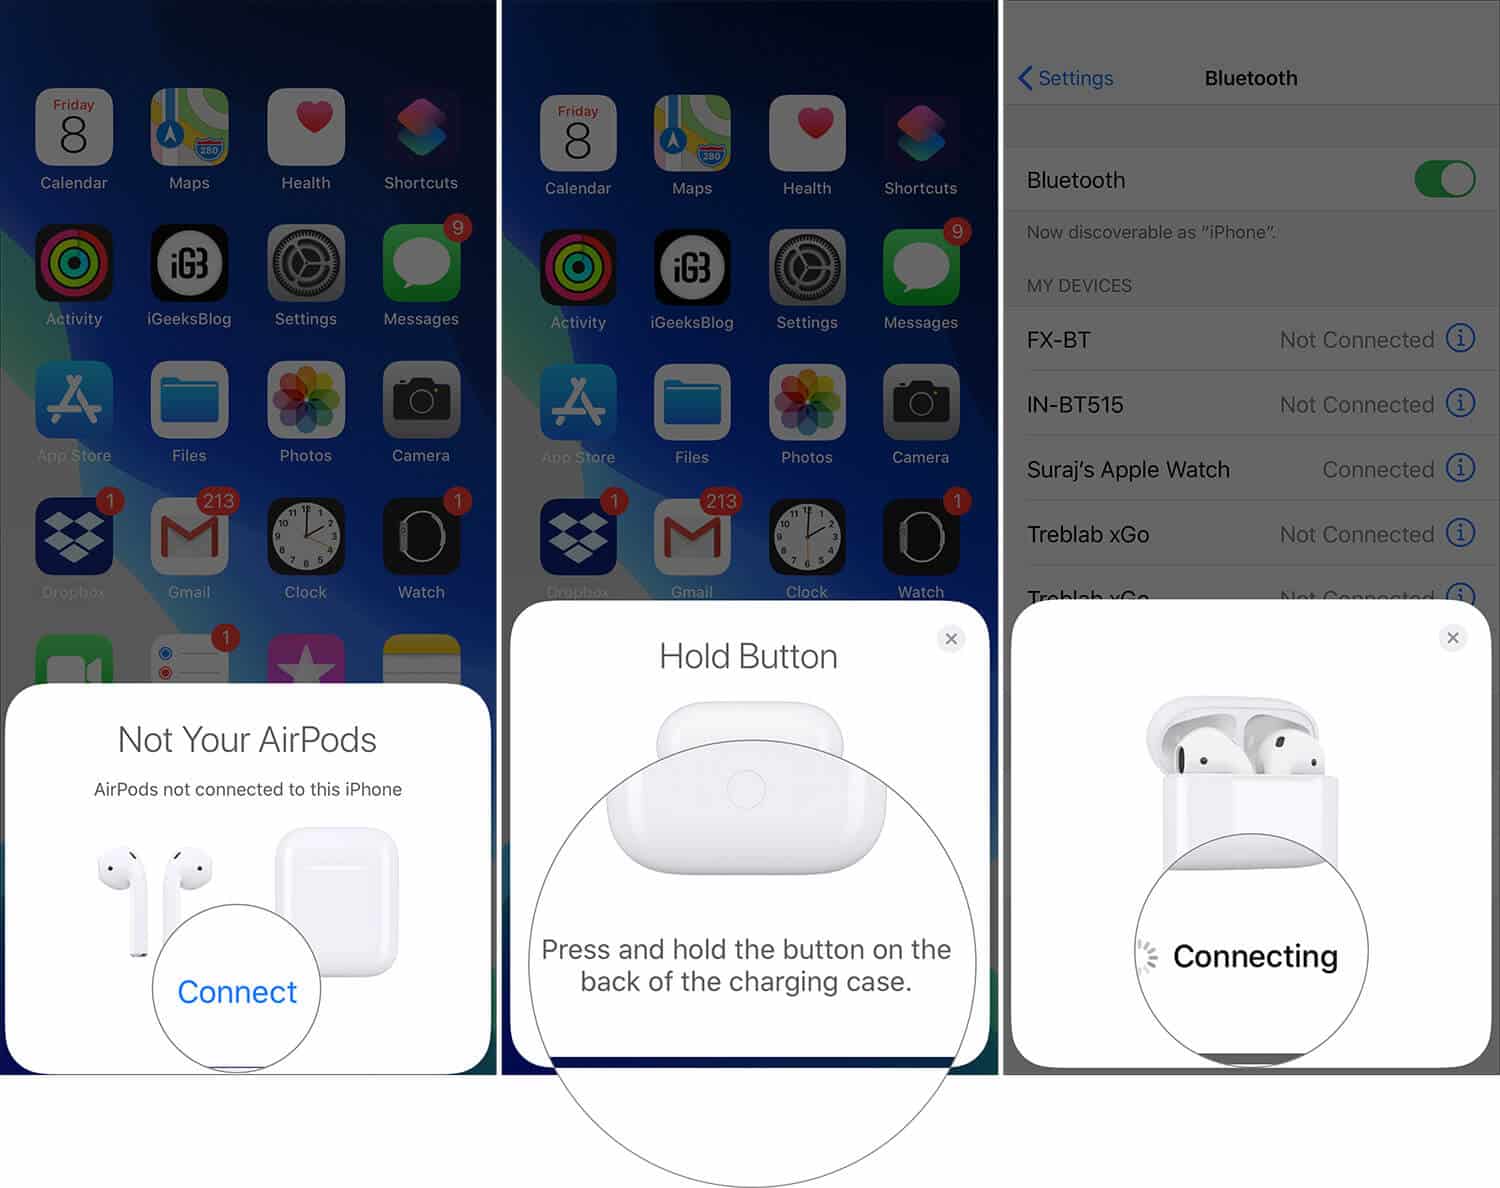 Connect and Press Hold setup button to pair AirPods with iPhone